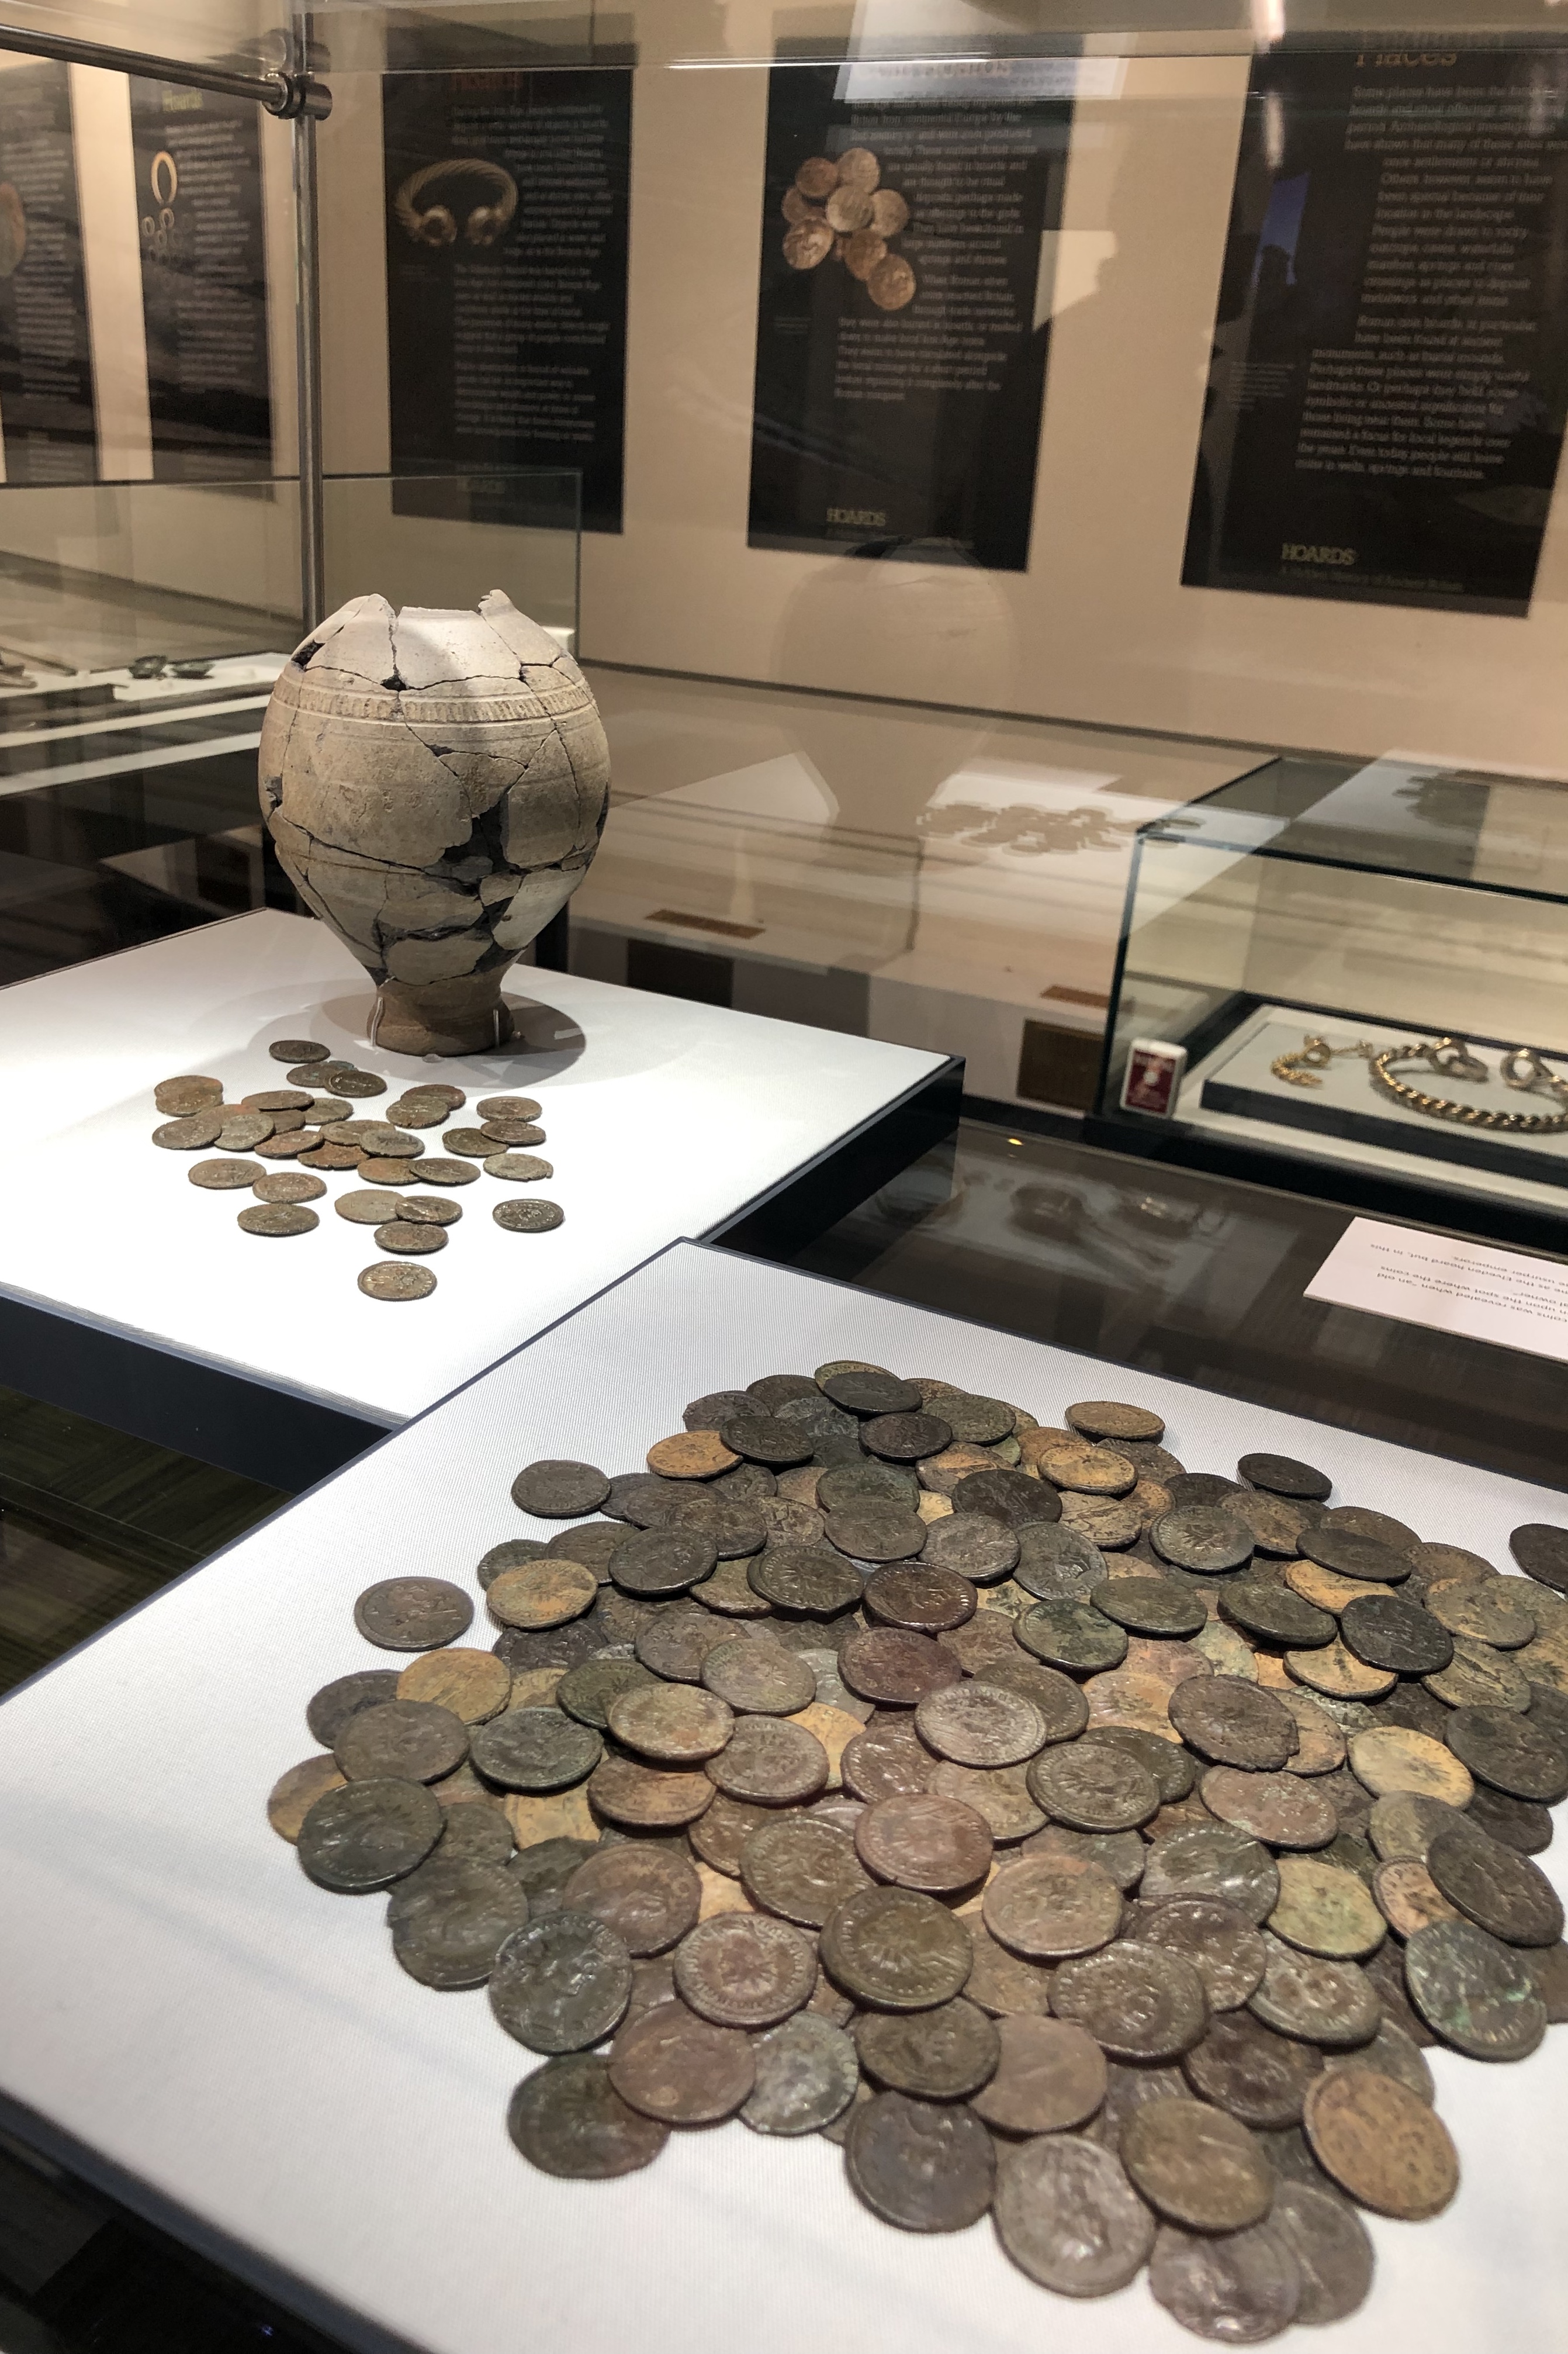 Hoards: a hidden history of ancient Britain